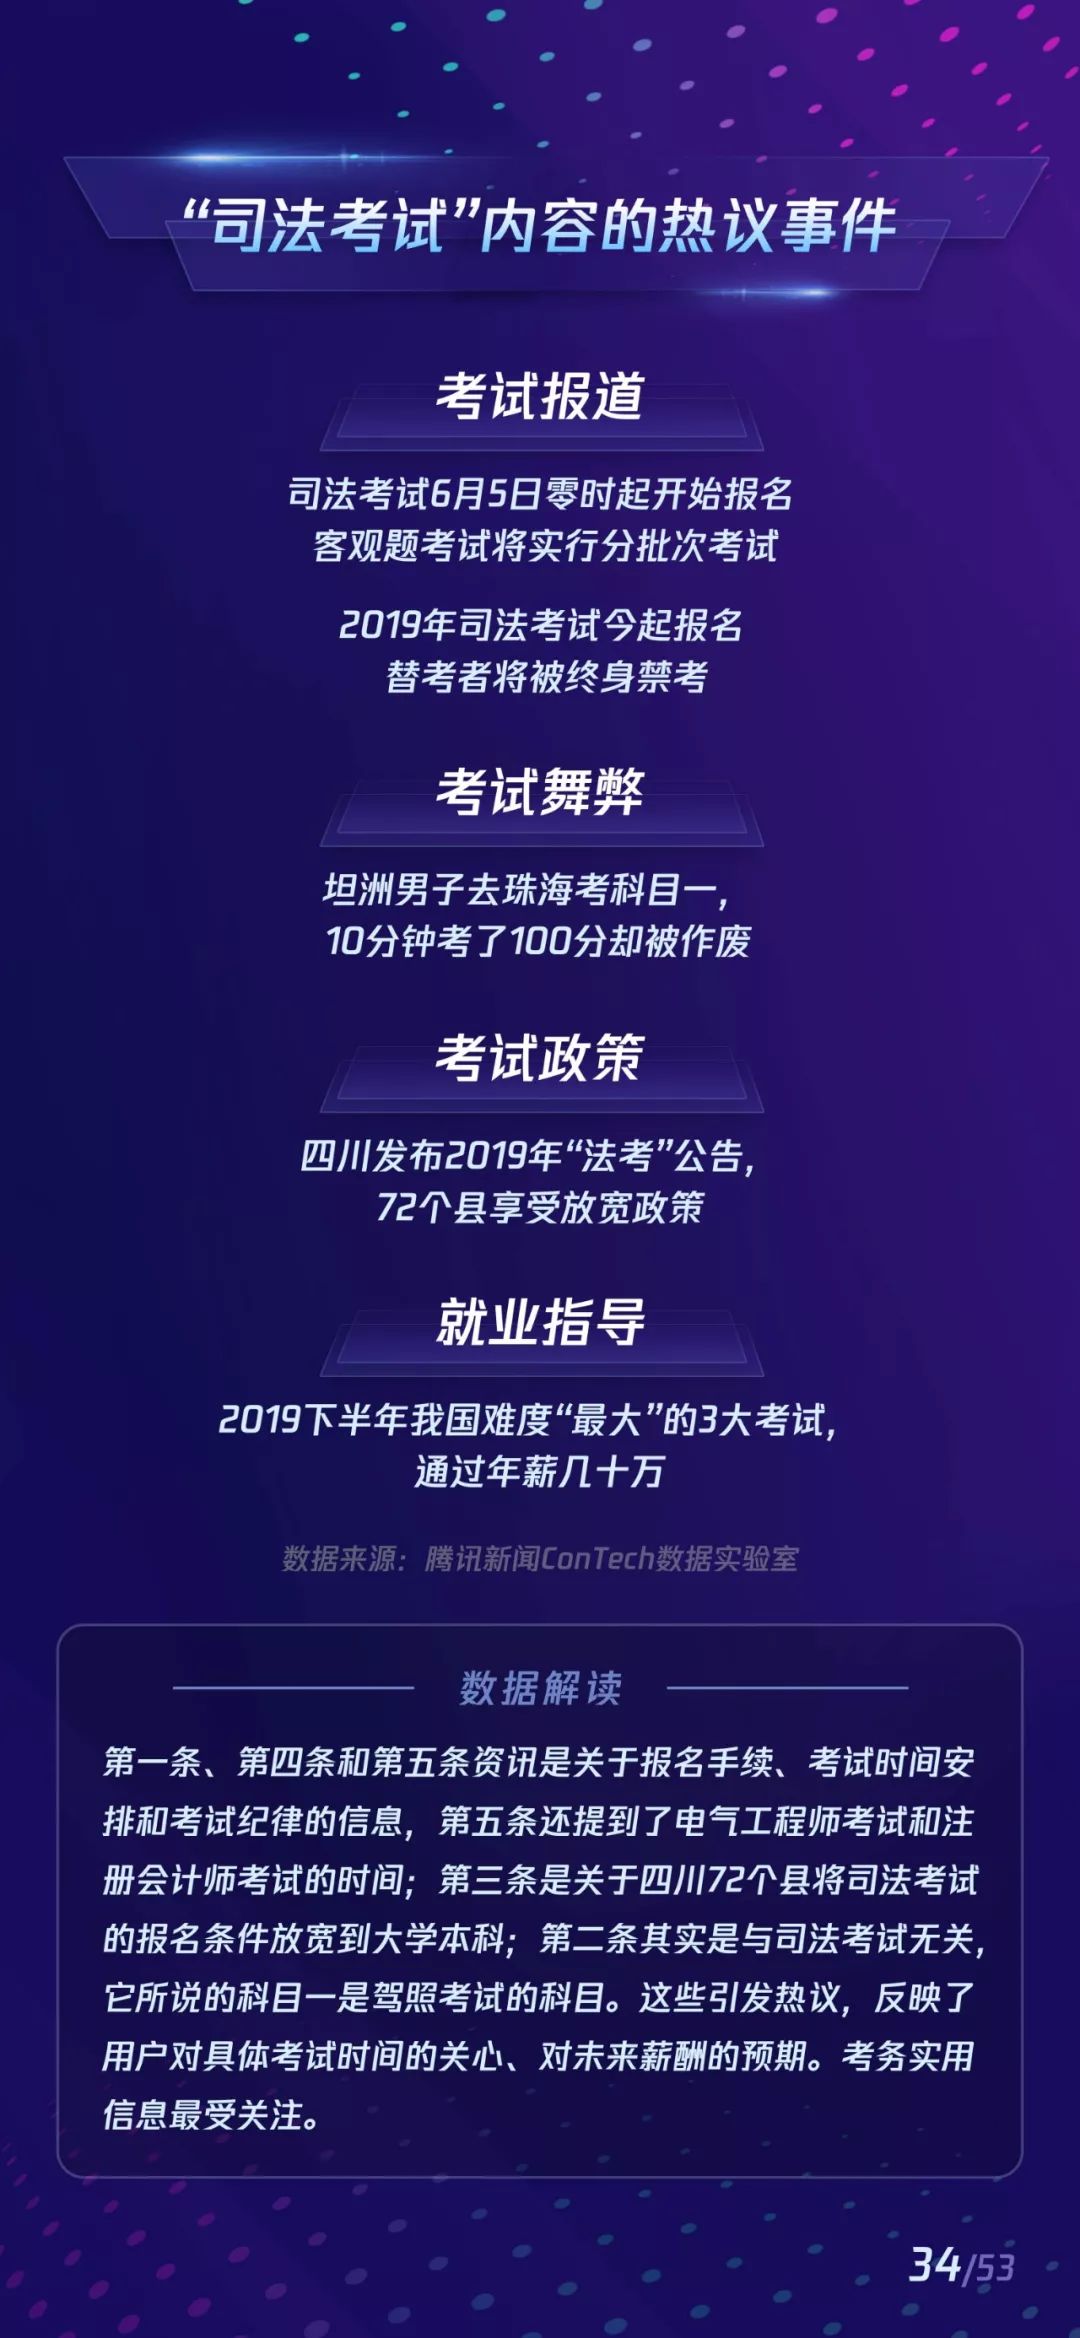 Tencent News ConTech Data Lab releases new education content distribution report for 2019